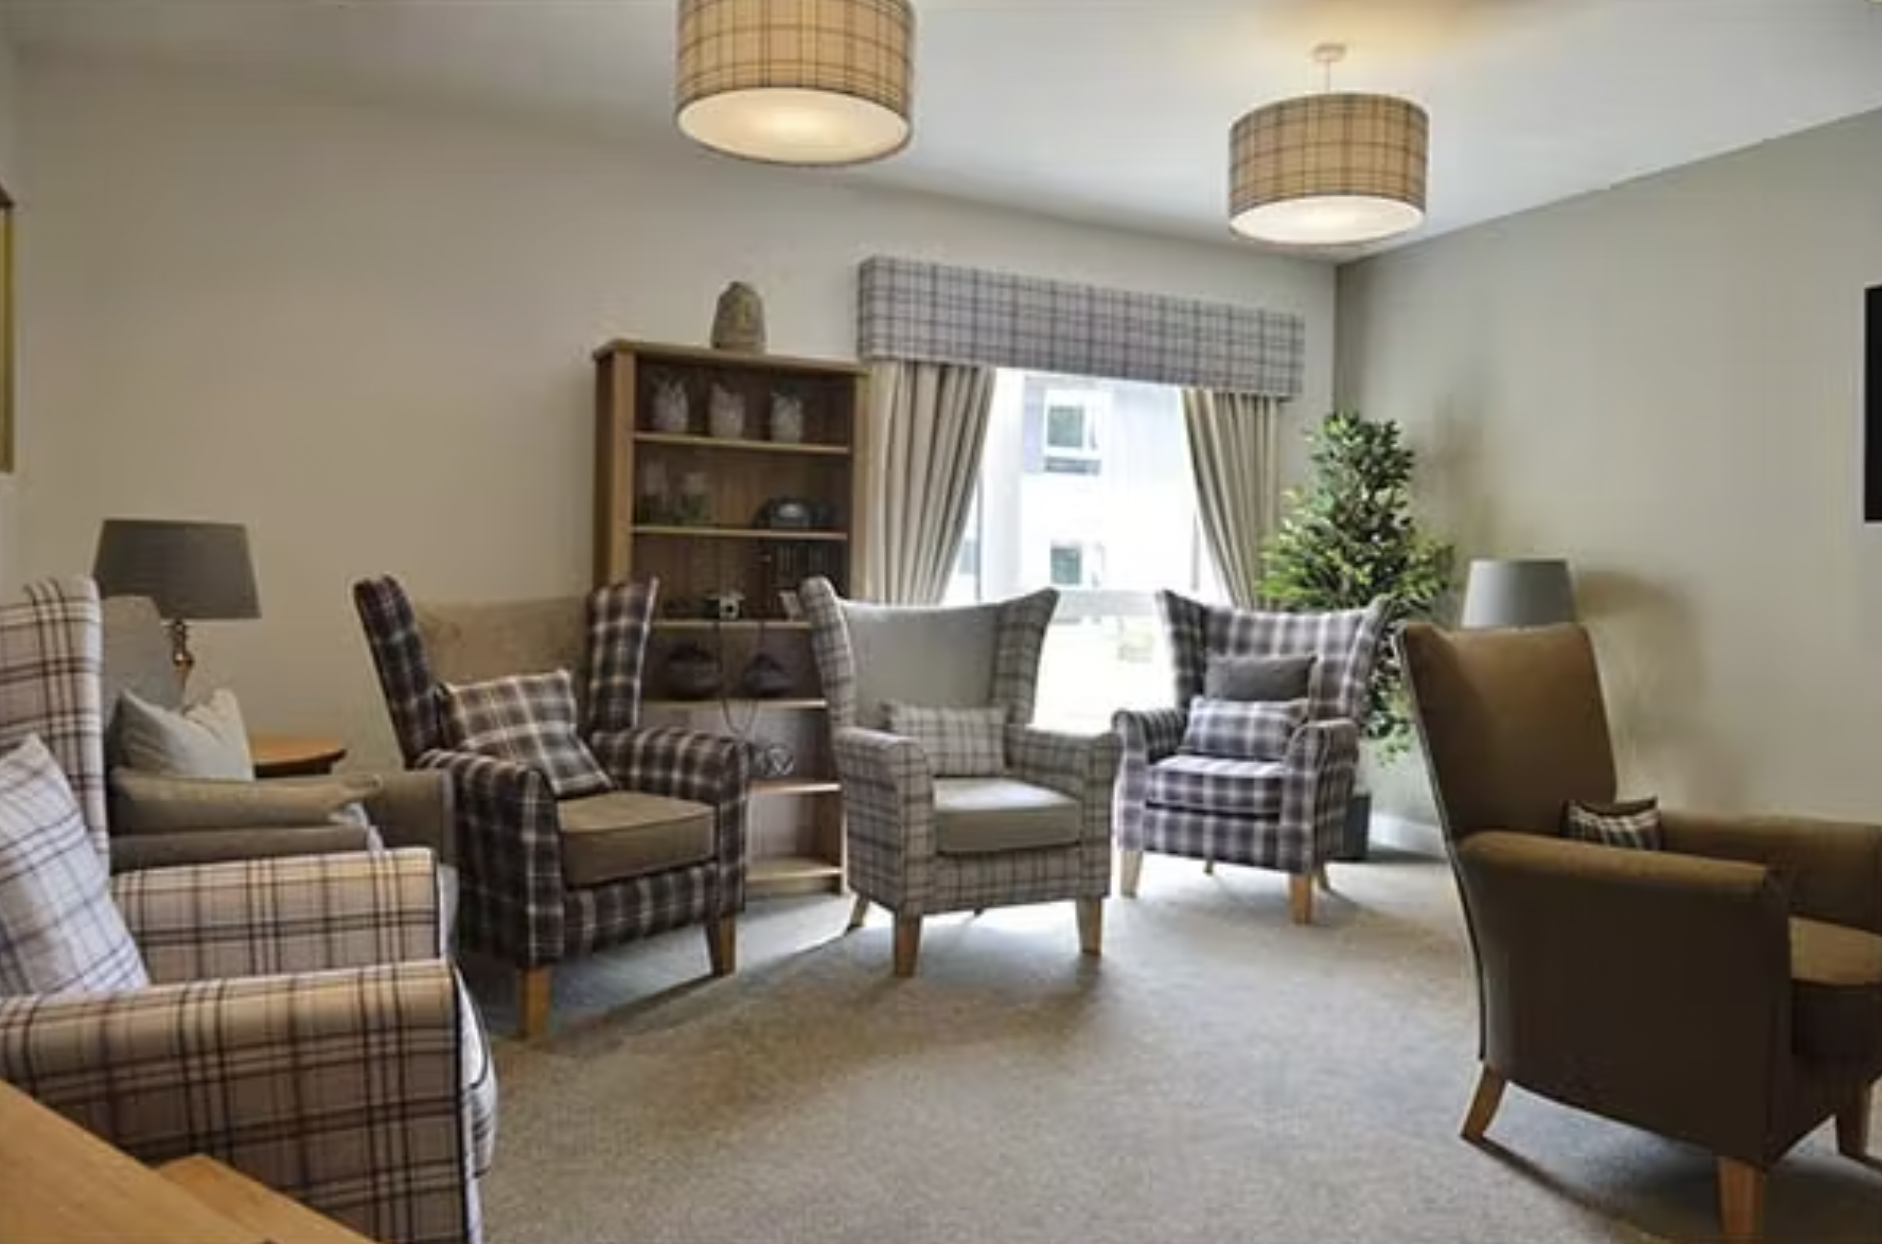 Independent Care Home - Kingsacre care home 10